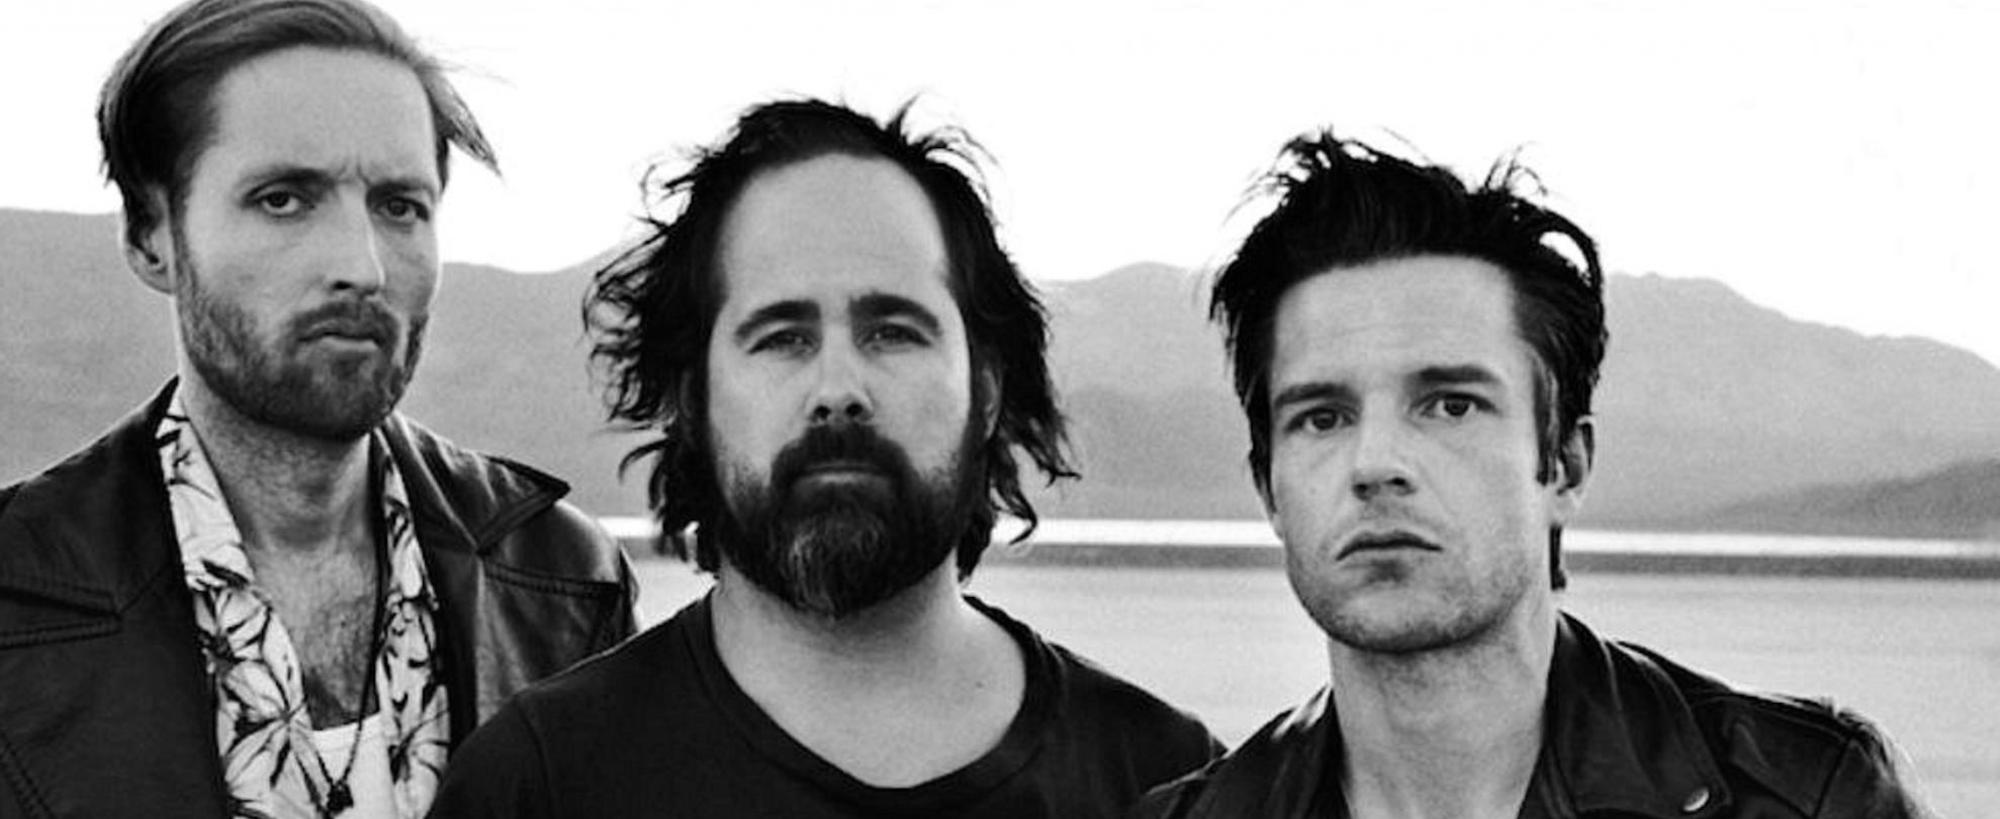 The Killers Working Well Into Eighth Album with Dave Keuning